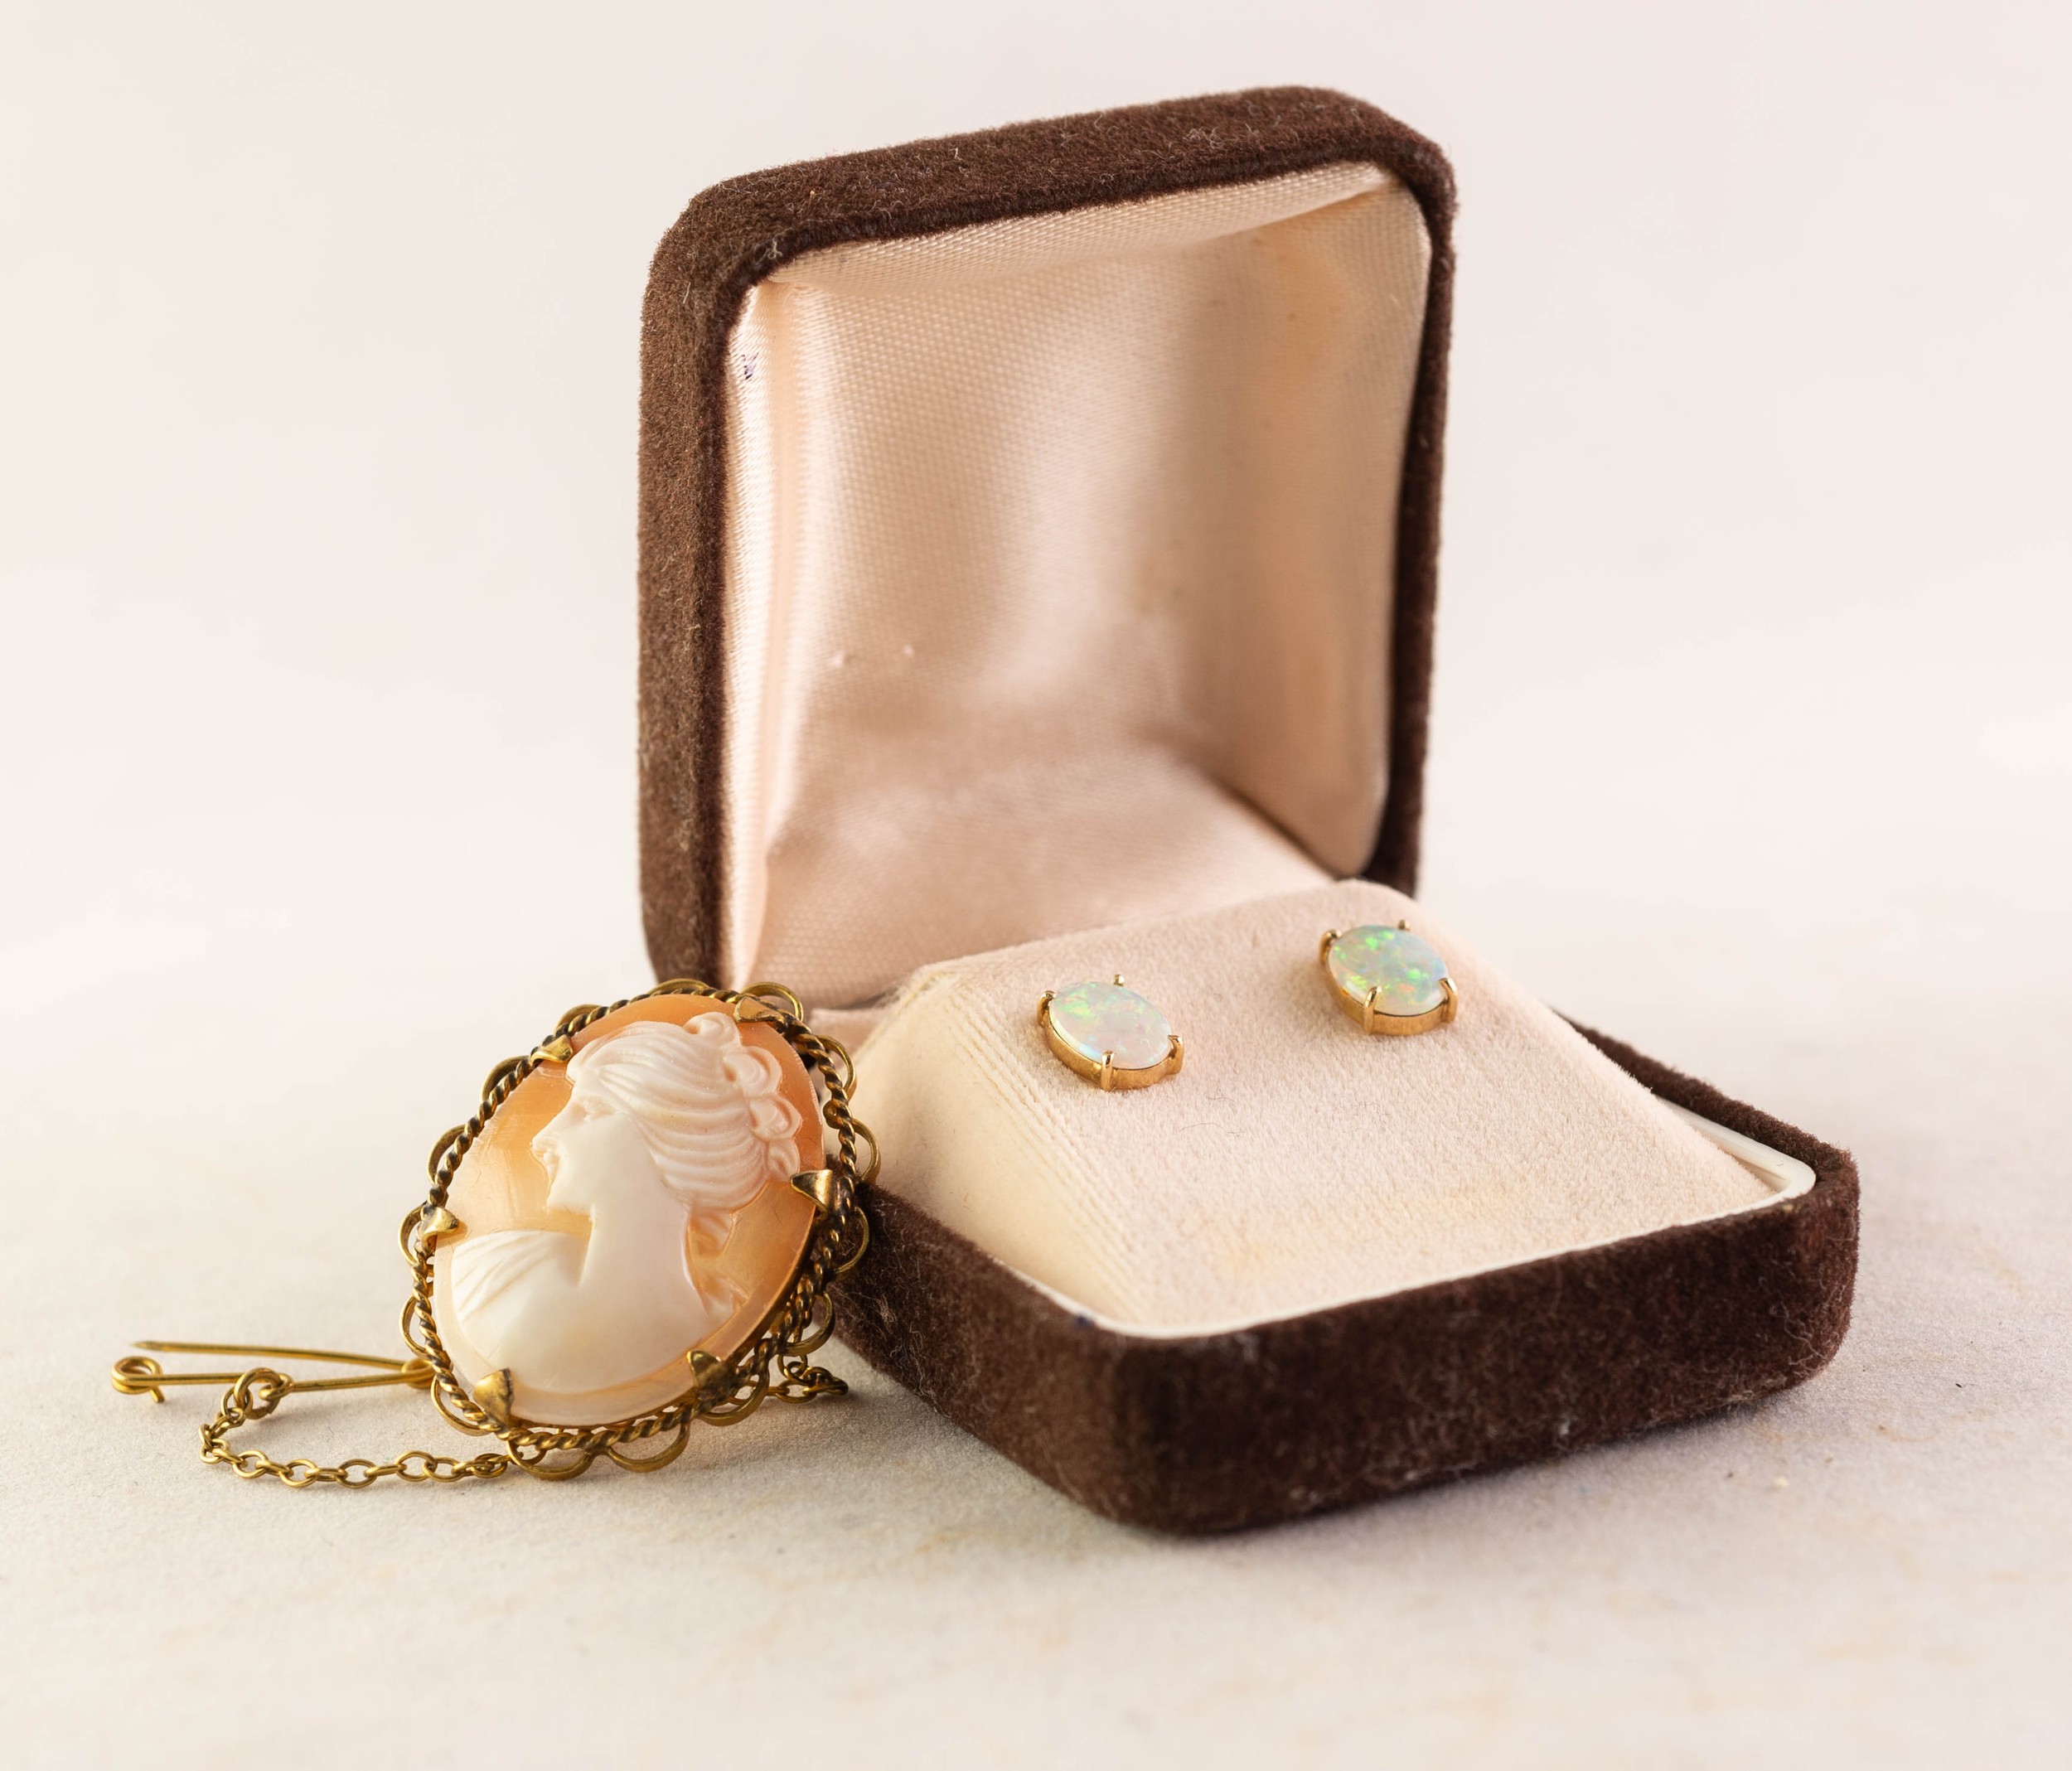 PAIR OF 14ct GOLD STUD EARRINGS, each with an oval opal in a four claw setting, in case with